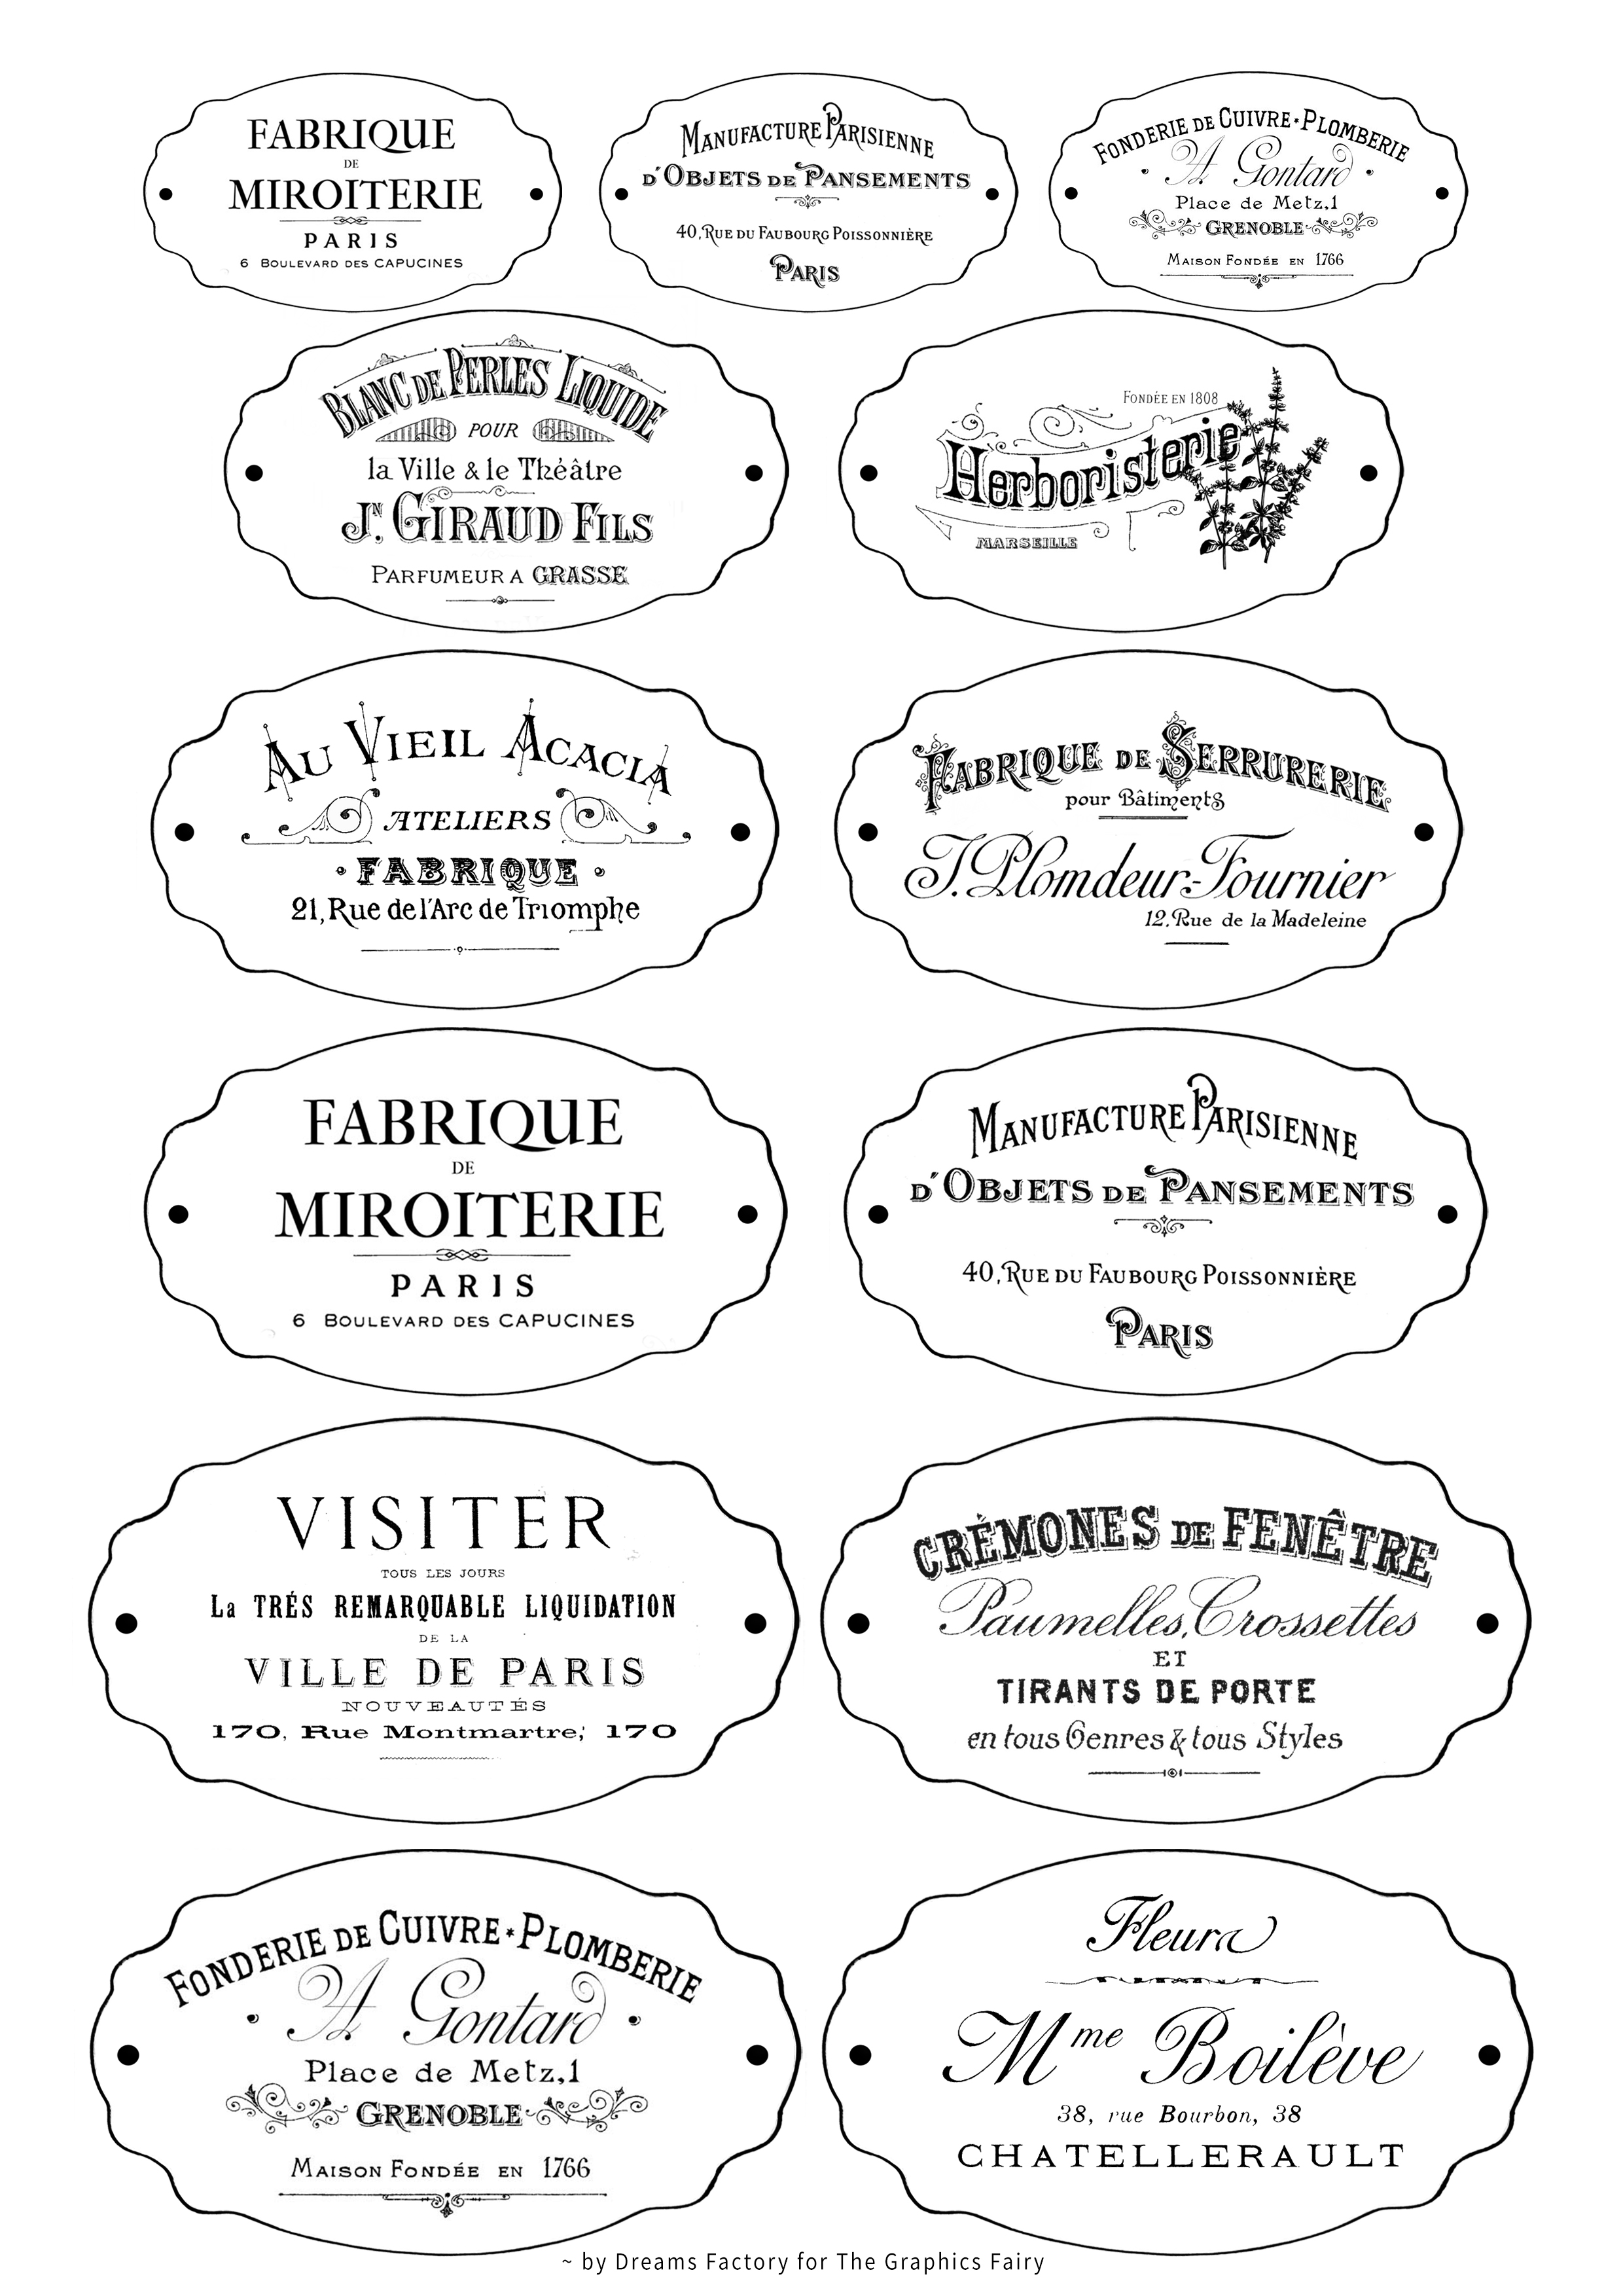 French labels printable